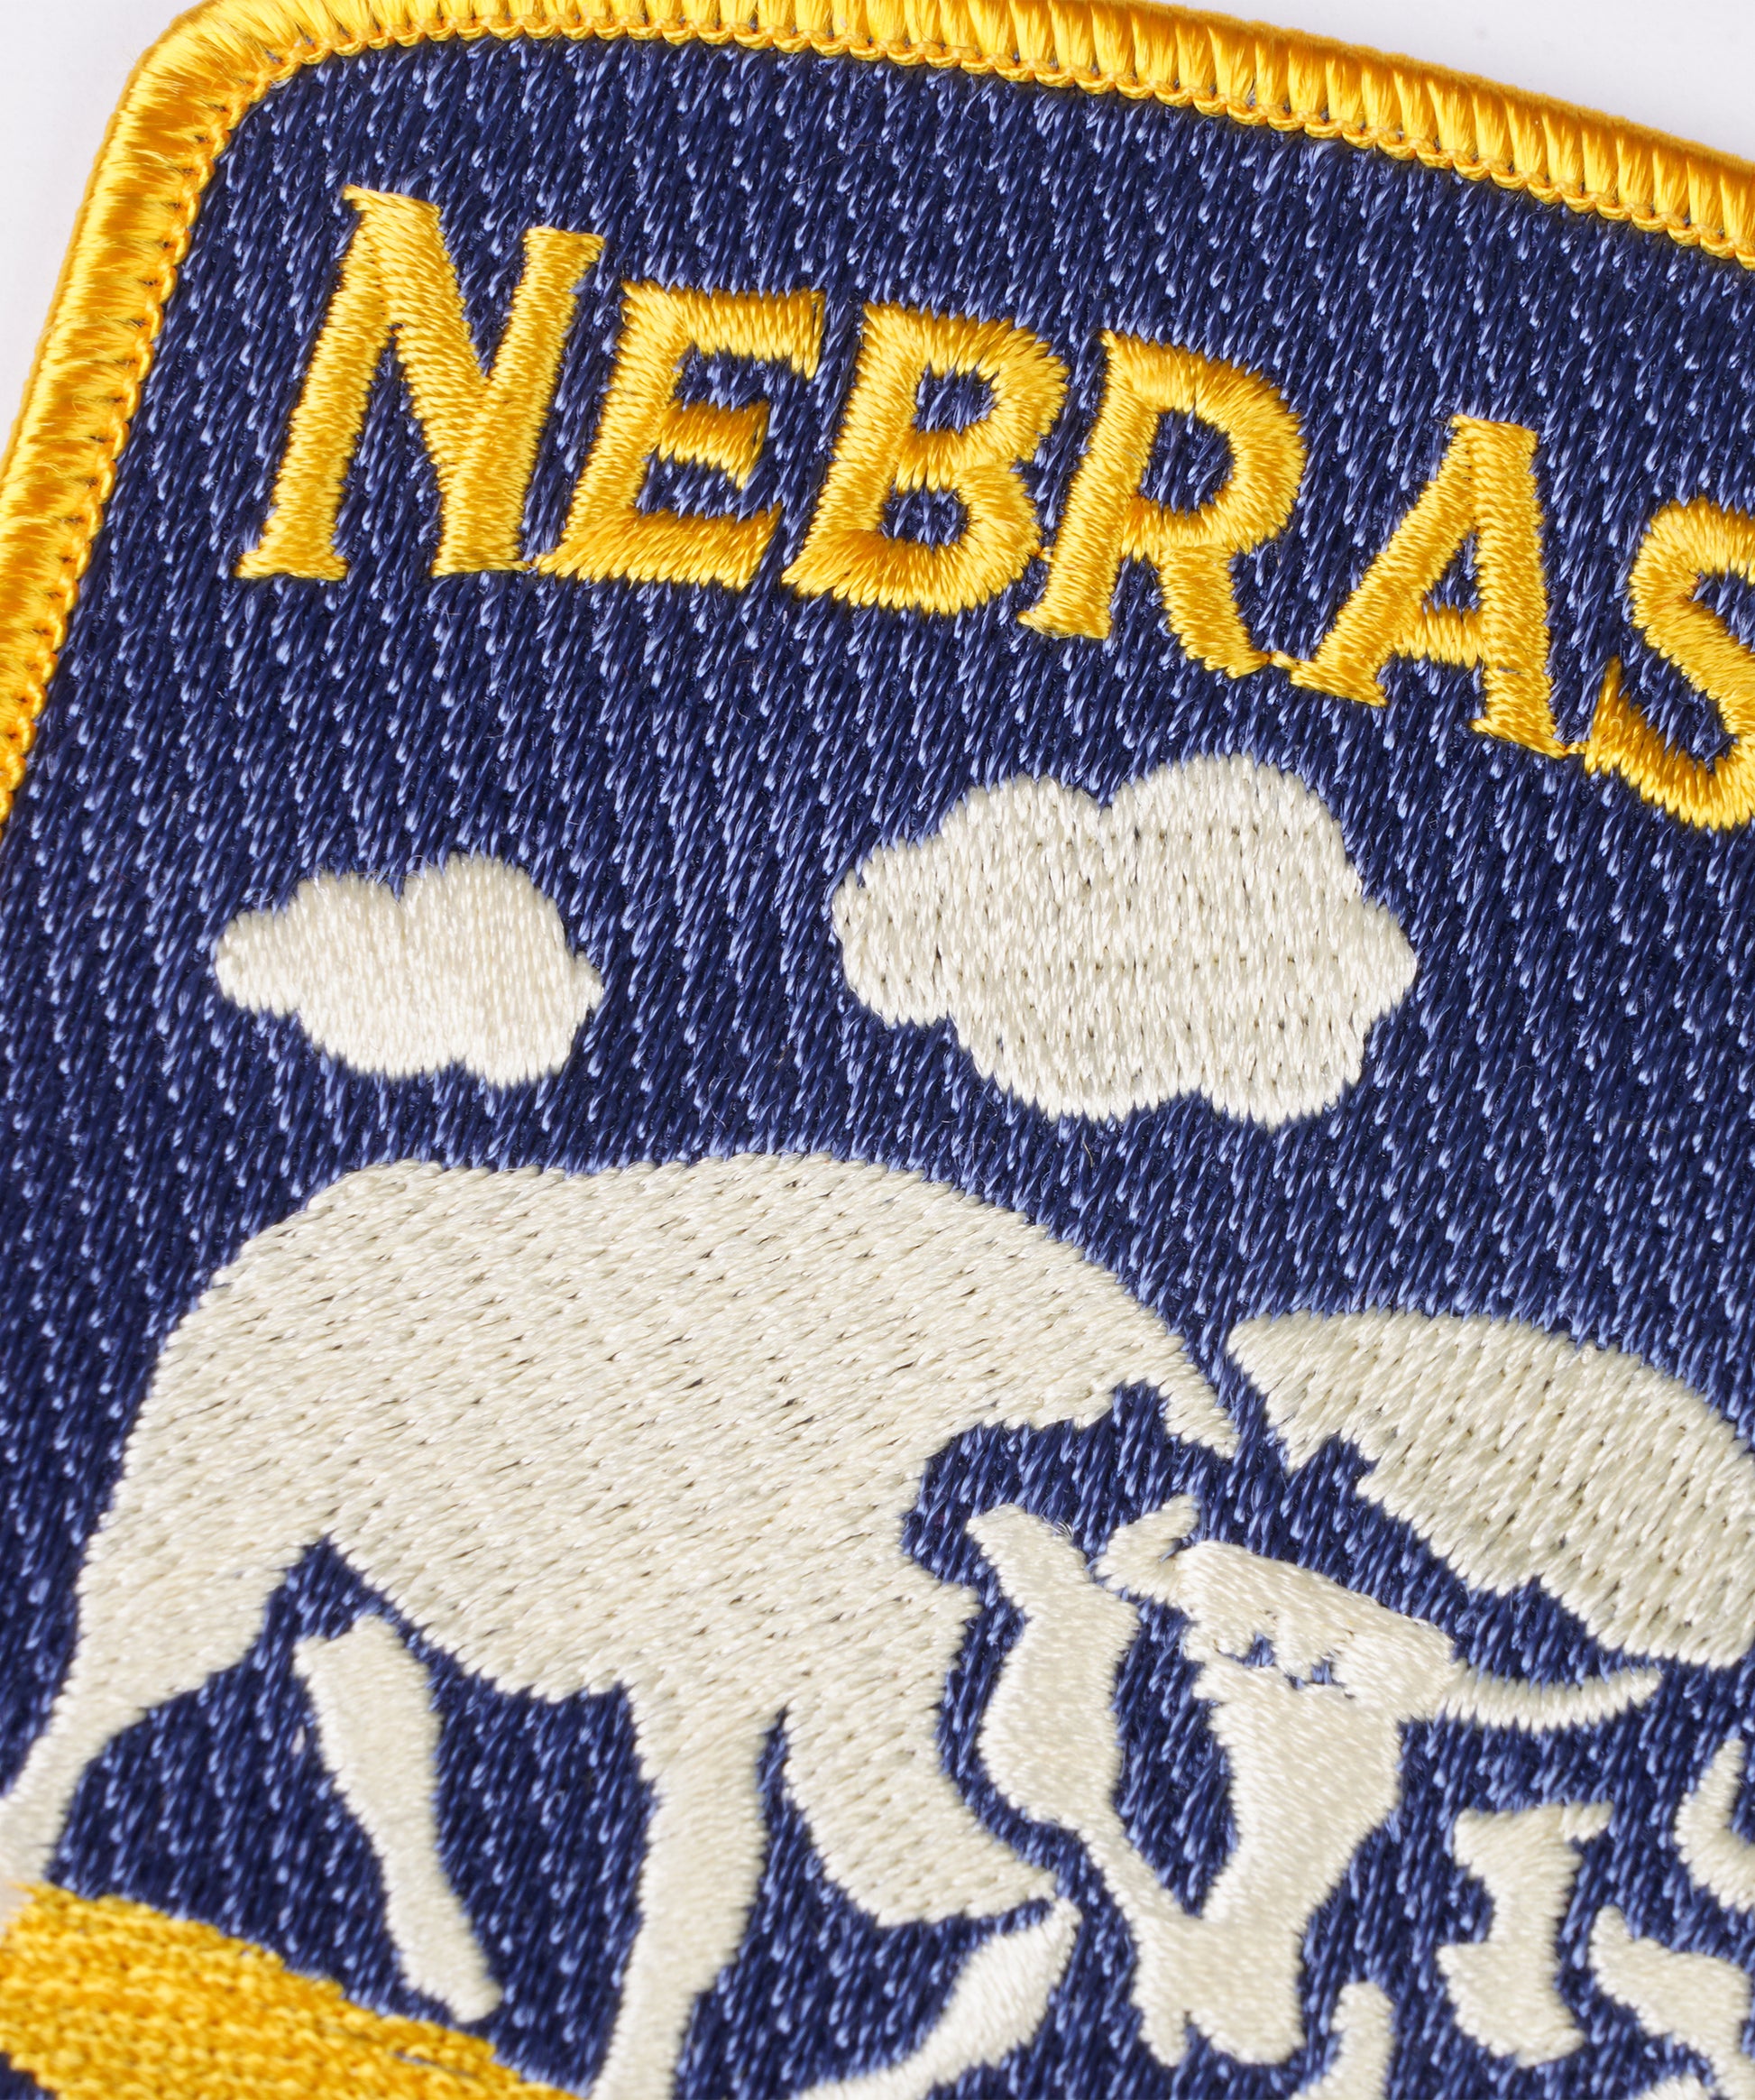 PatchStop State of Nebraska Iron On Patches for Clothing